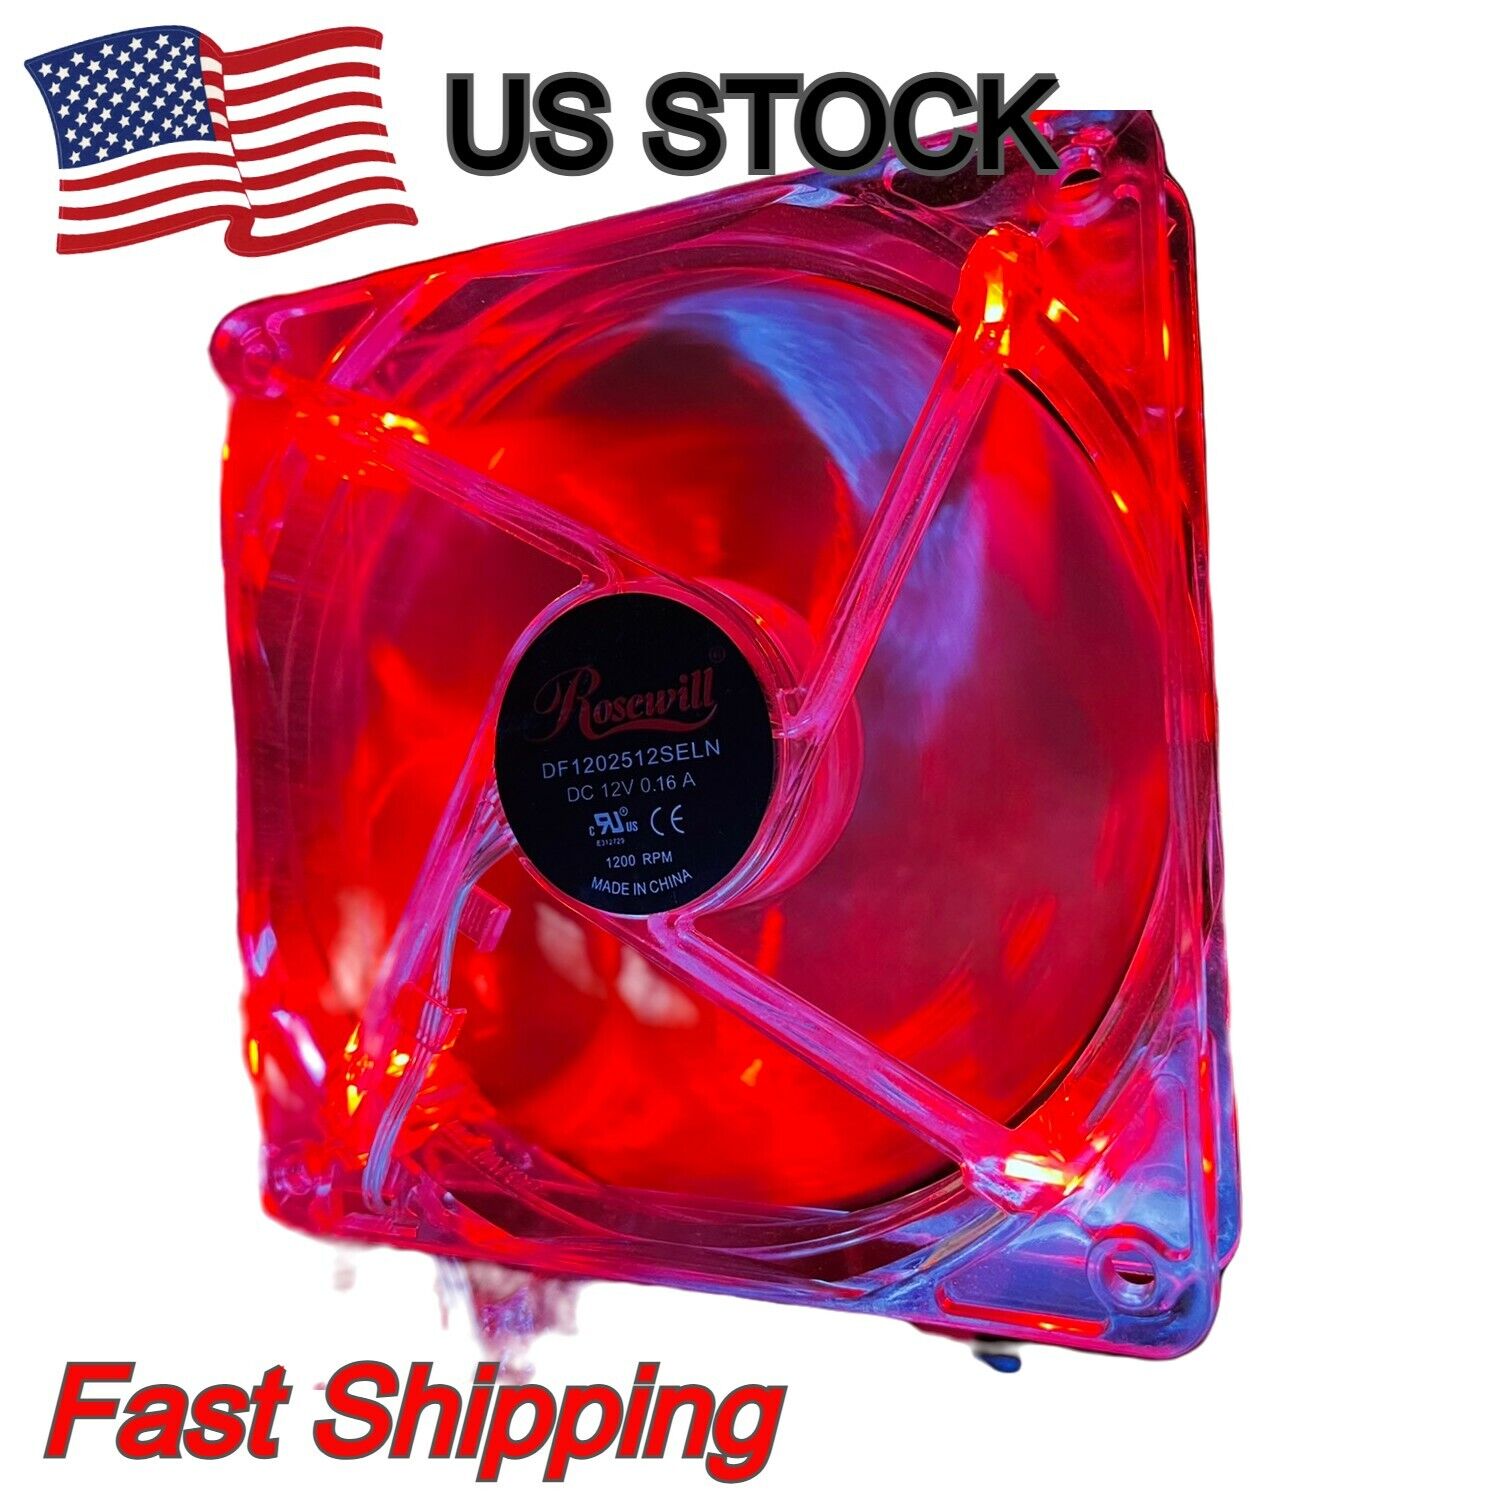 Rosewill LED 120mm Quiet PC Computer Case Cooling Fan 3pin 12V 0.16A 120*120*25 